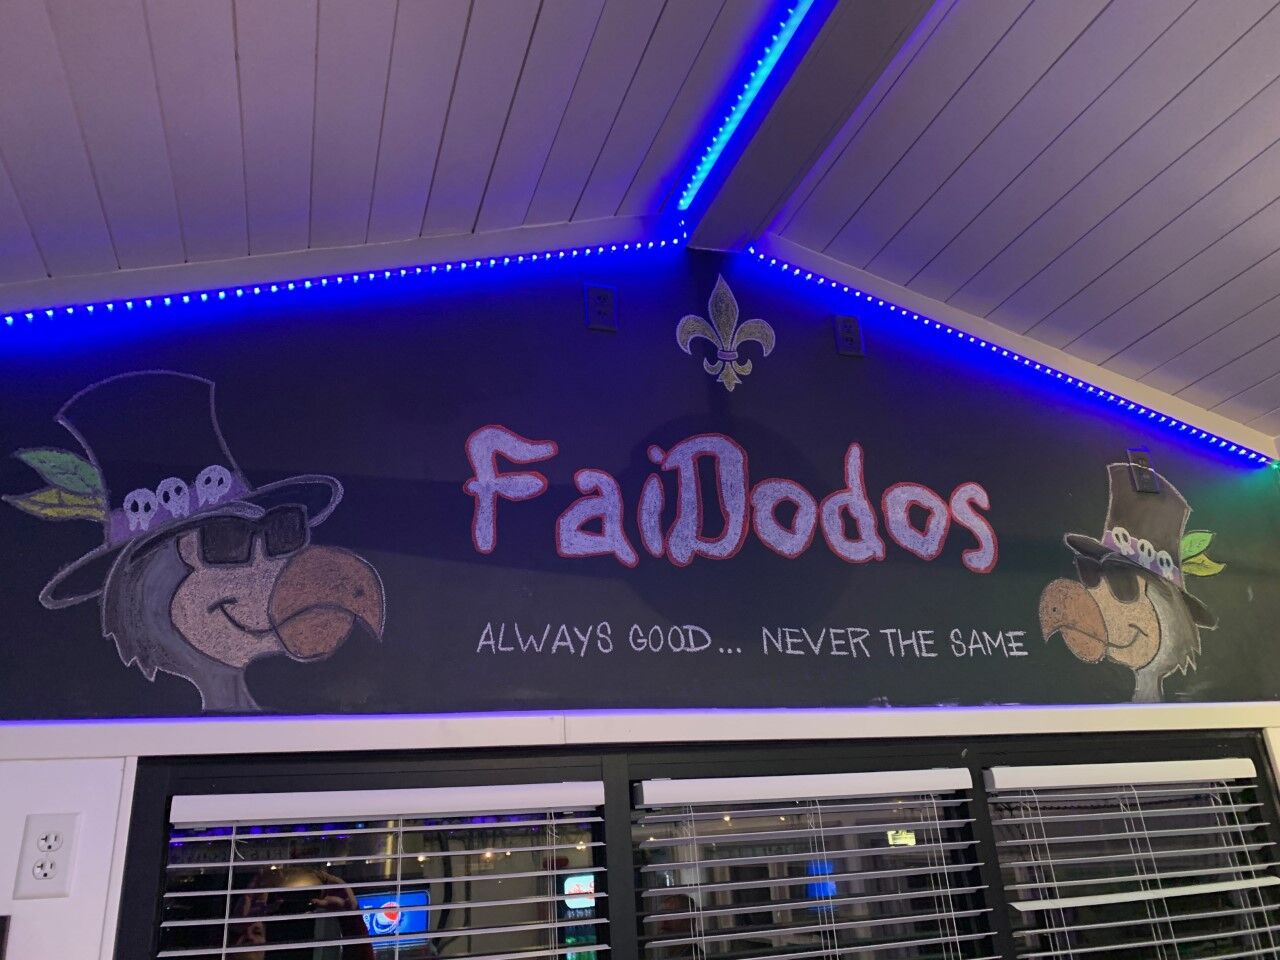 FaiDodos gives street food a place on the menu in Sellersburg, Indiana | Morning